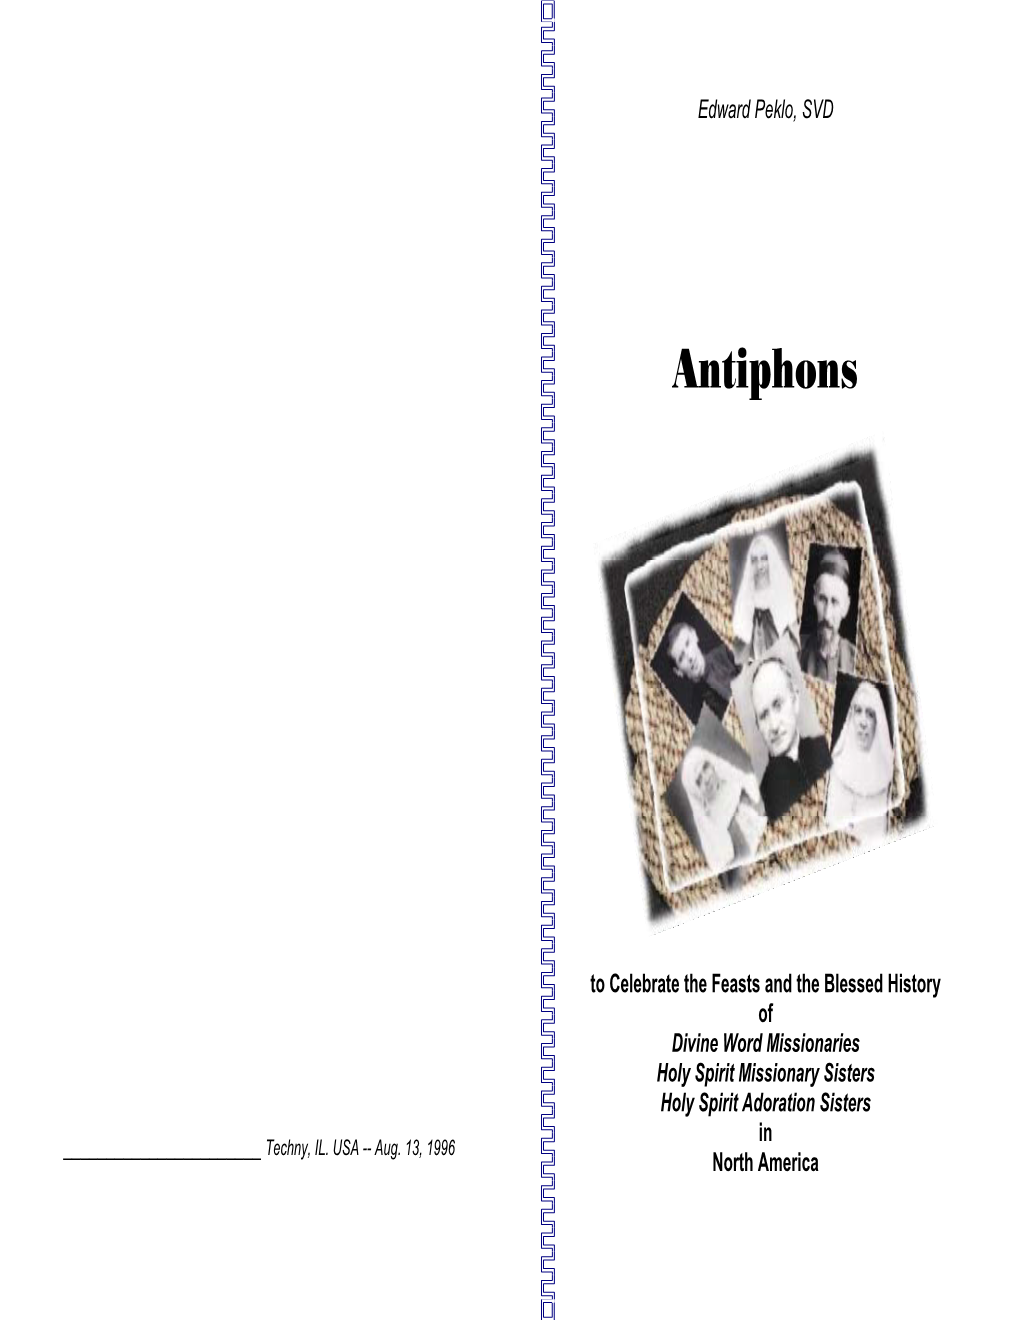 Download the Book of Antiphons In